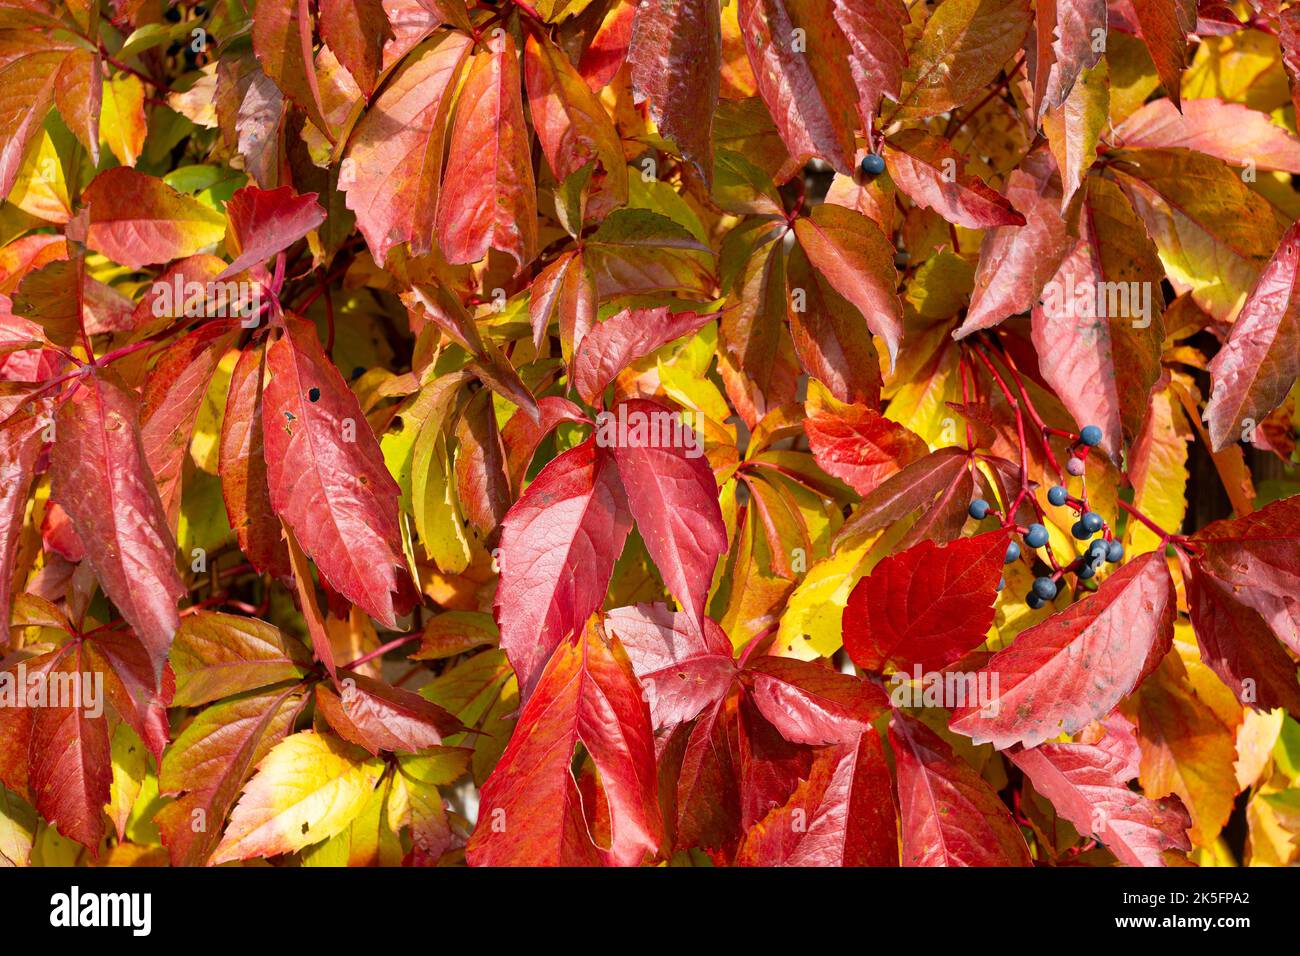 Red and yellow leaves on a wall. Autumn season. Stock Photo